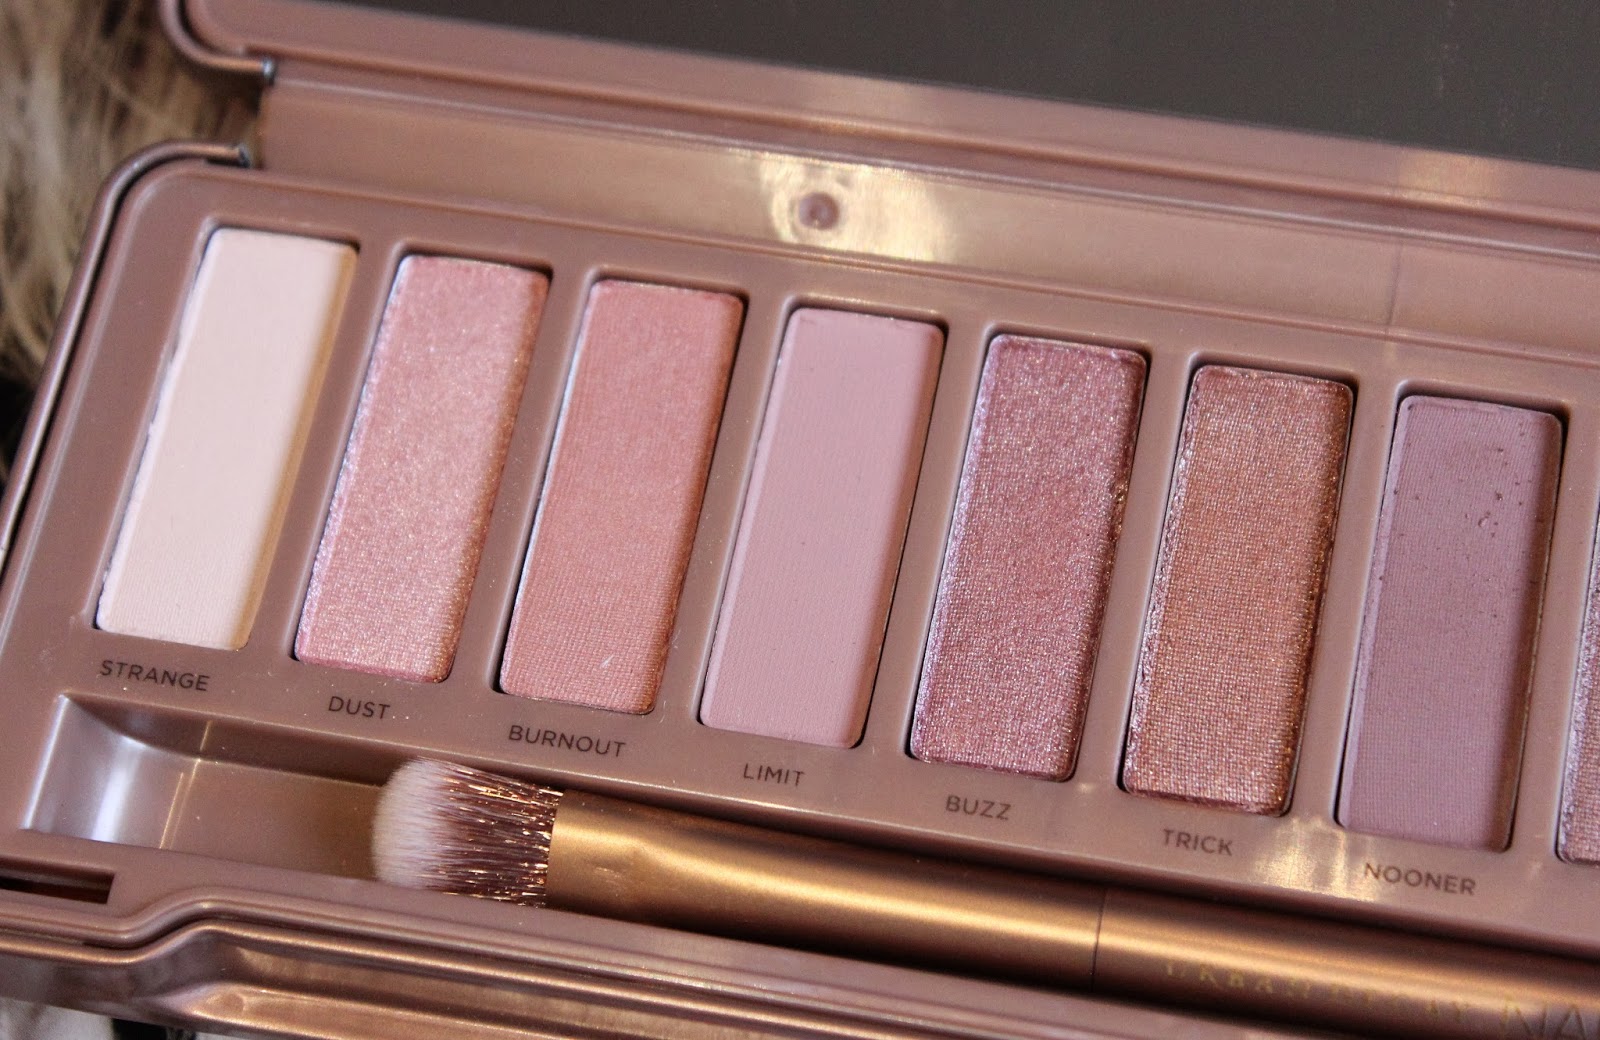 REVIEW & SWATCHES: Urban Decay Naked 3 Palette - From Head 